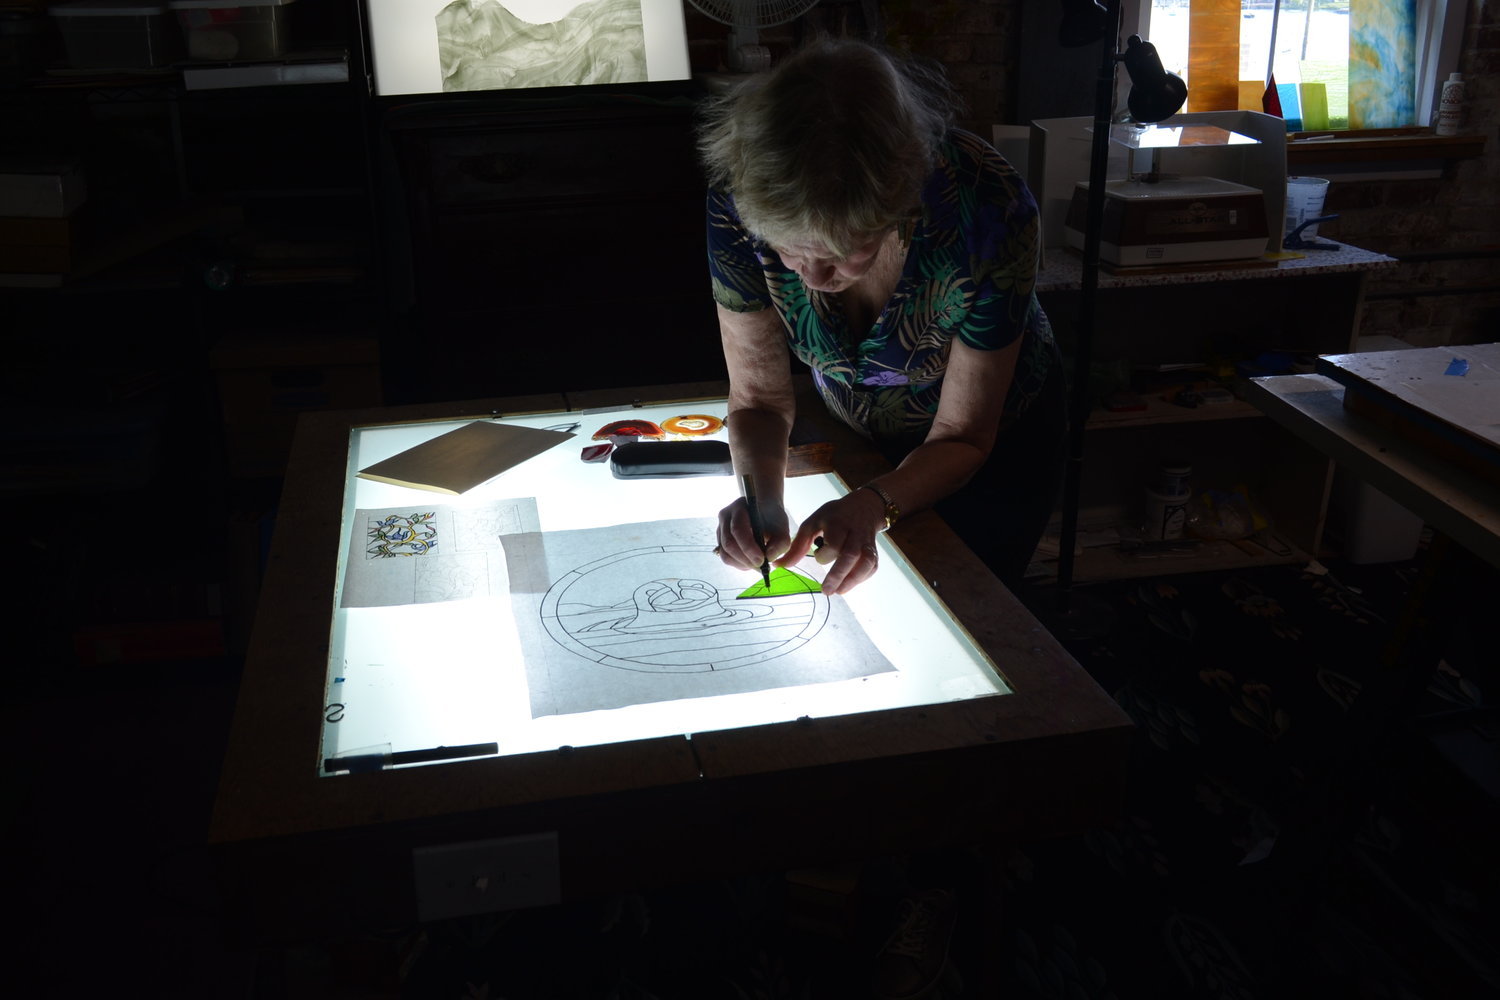 Diana Cole, an artist of many talents, draws a line using a light table onto stained glass prior to scoring and breaking the piece, as part of Art Night’s Meet the Artist series where Cole gave a detailed demonstration on making stained glass art.